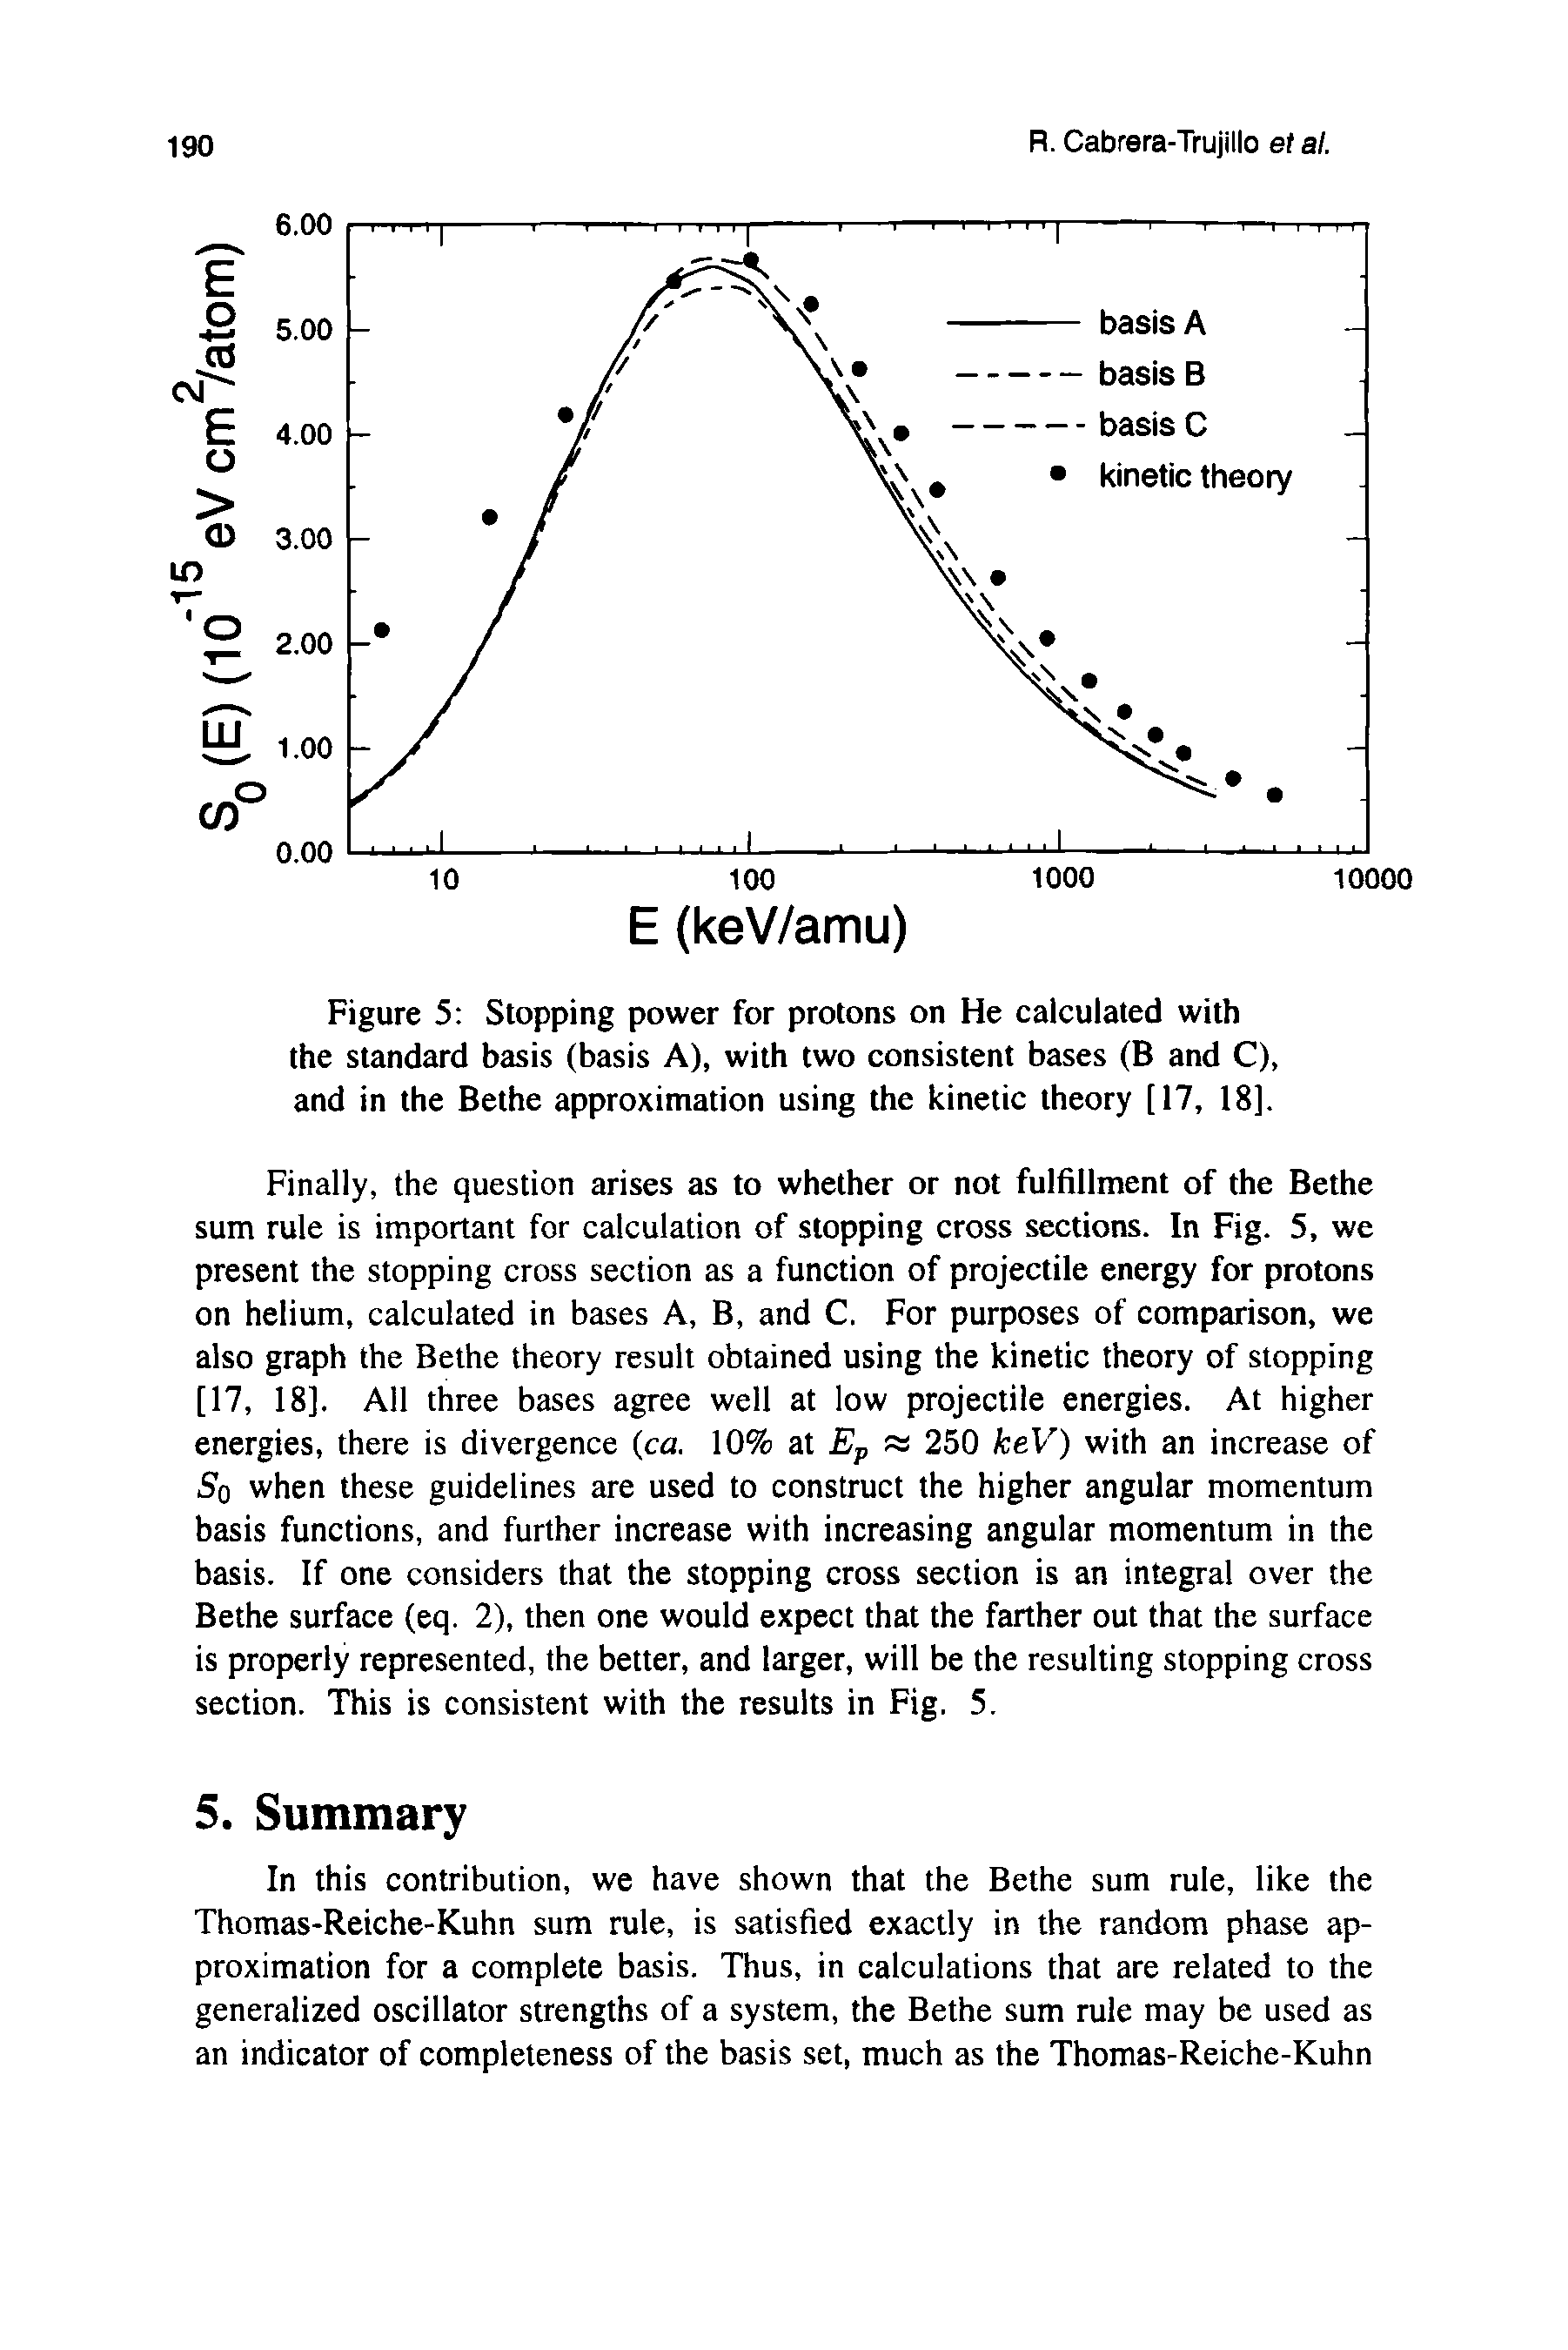 Figure 5 Stopping power for protons on He calculated with the standard basis (basis A), with two consistent bases (B and C), and in the Bethe approximation using the kinetic theory [17, 18],...